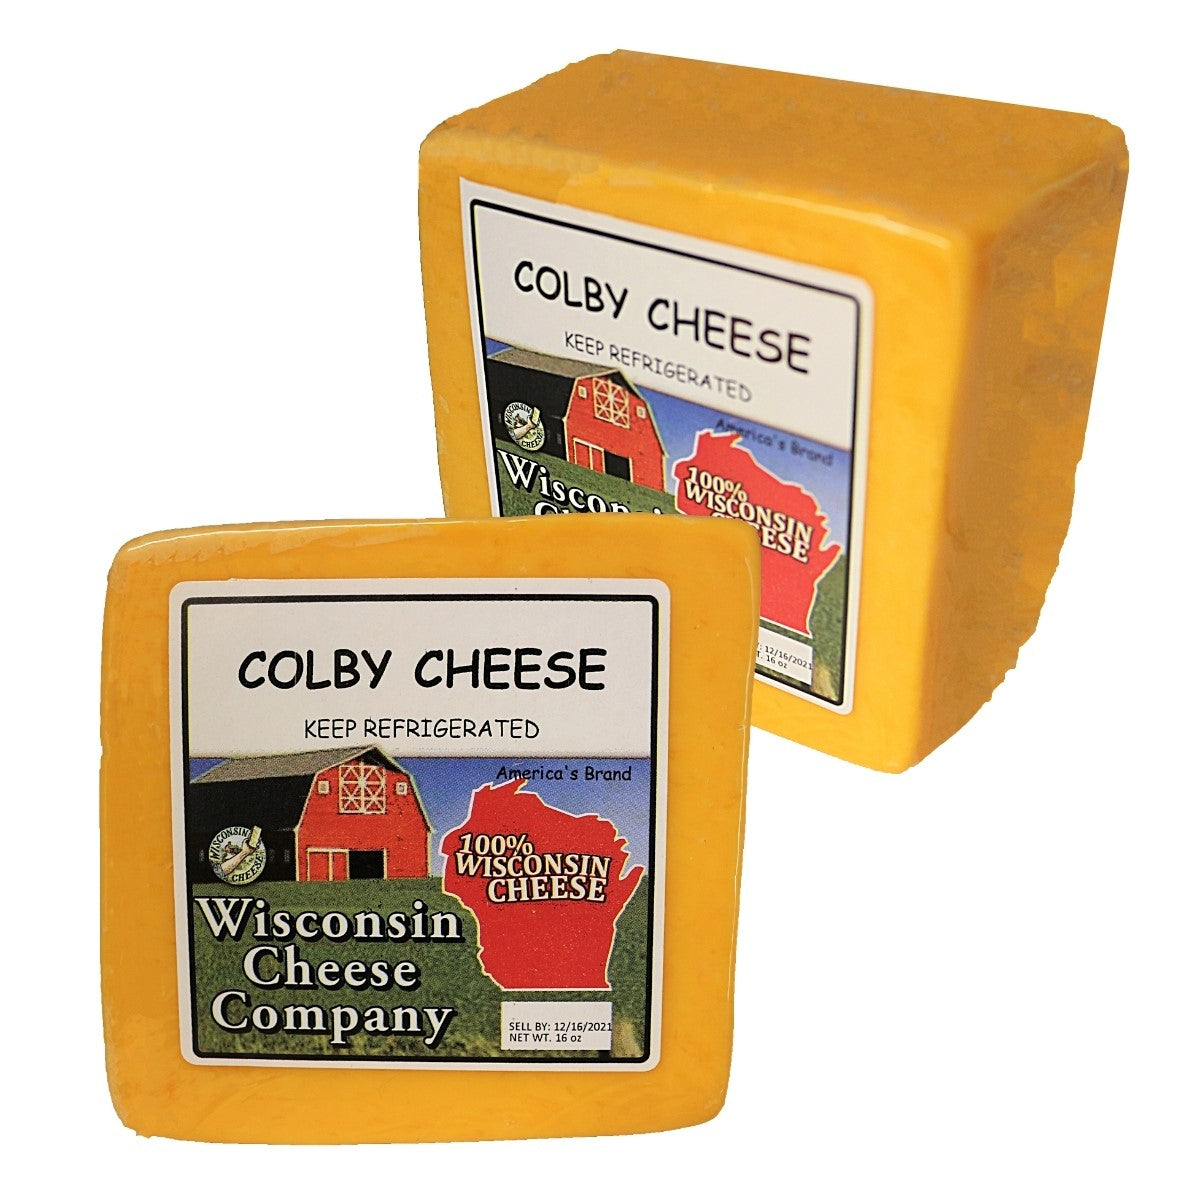 Two blocks of Colby Cheese